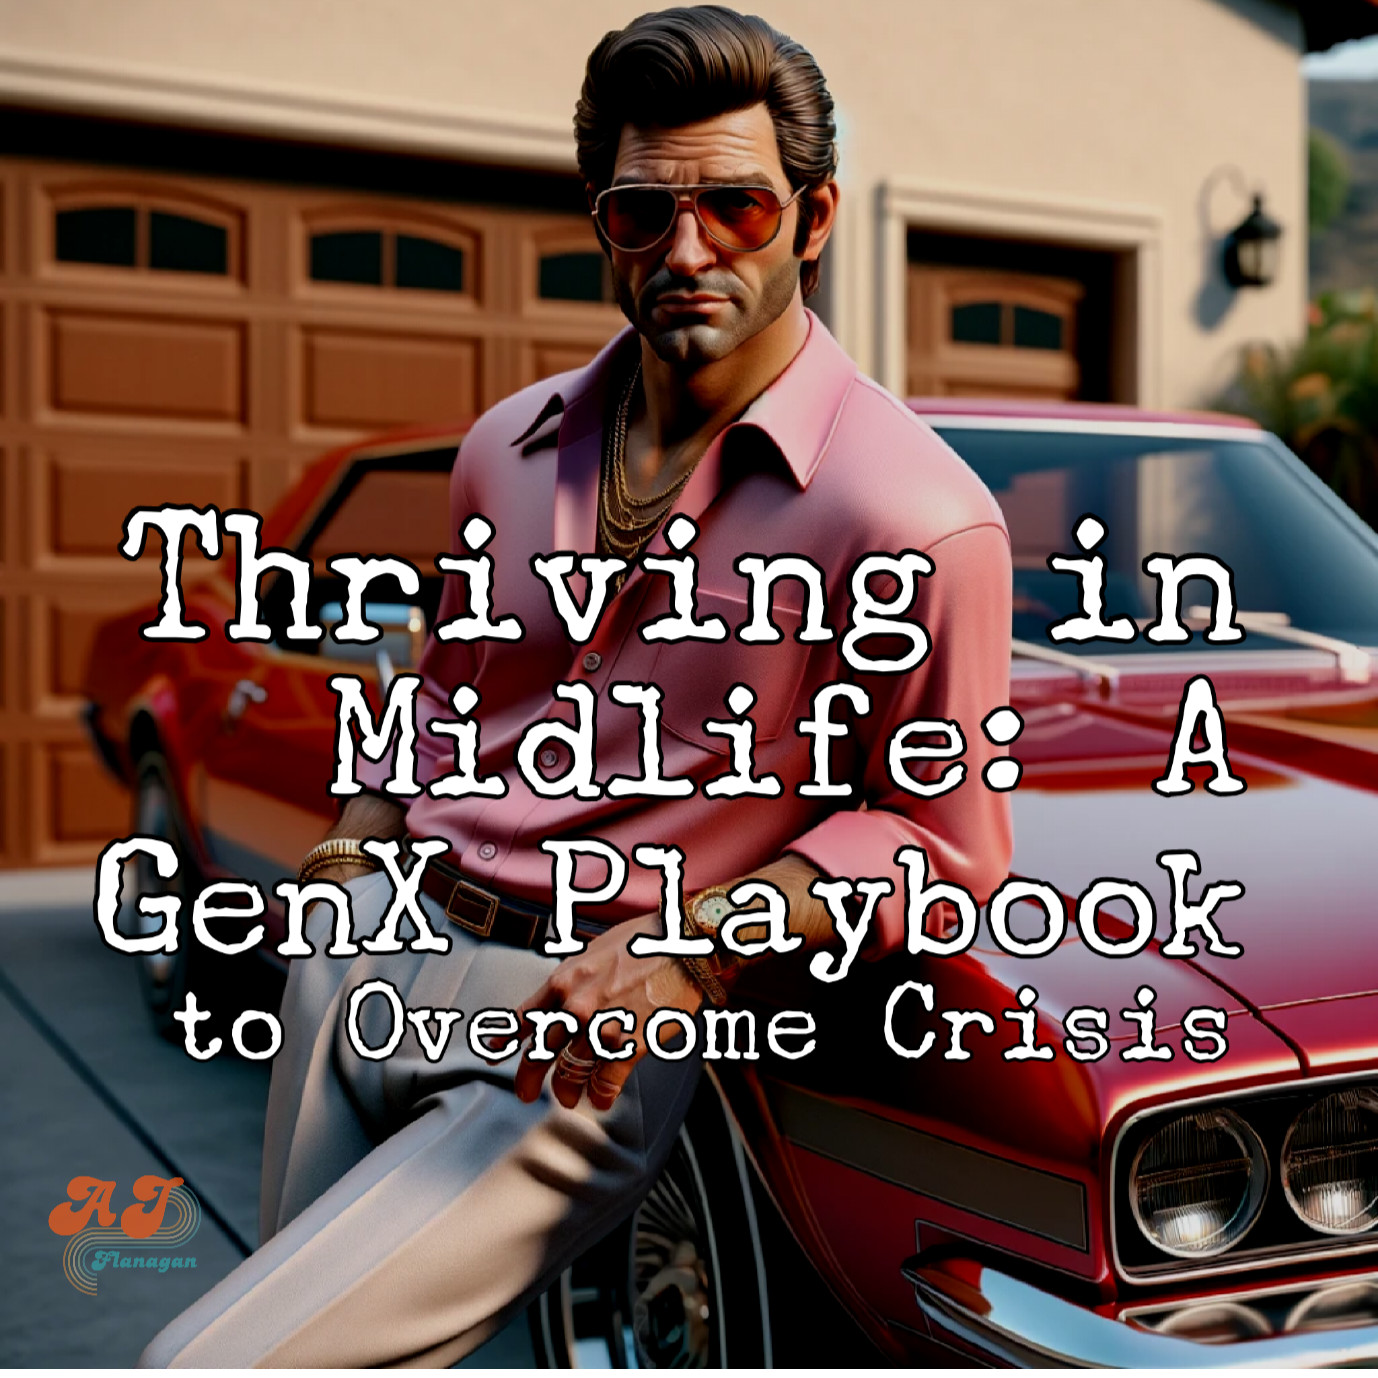 Thriving in Midlife: A GenX Playbook to Overcome Crisis